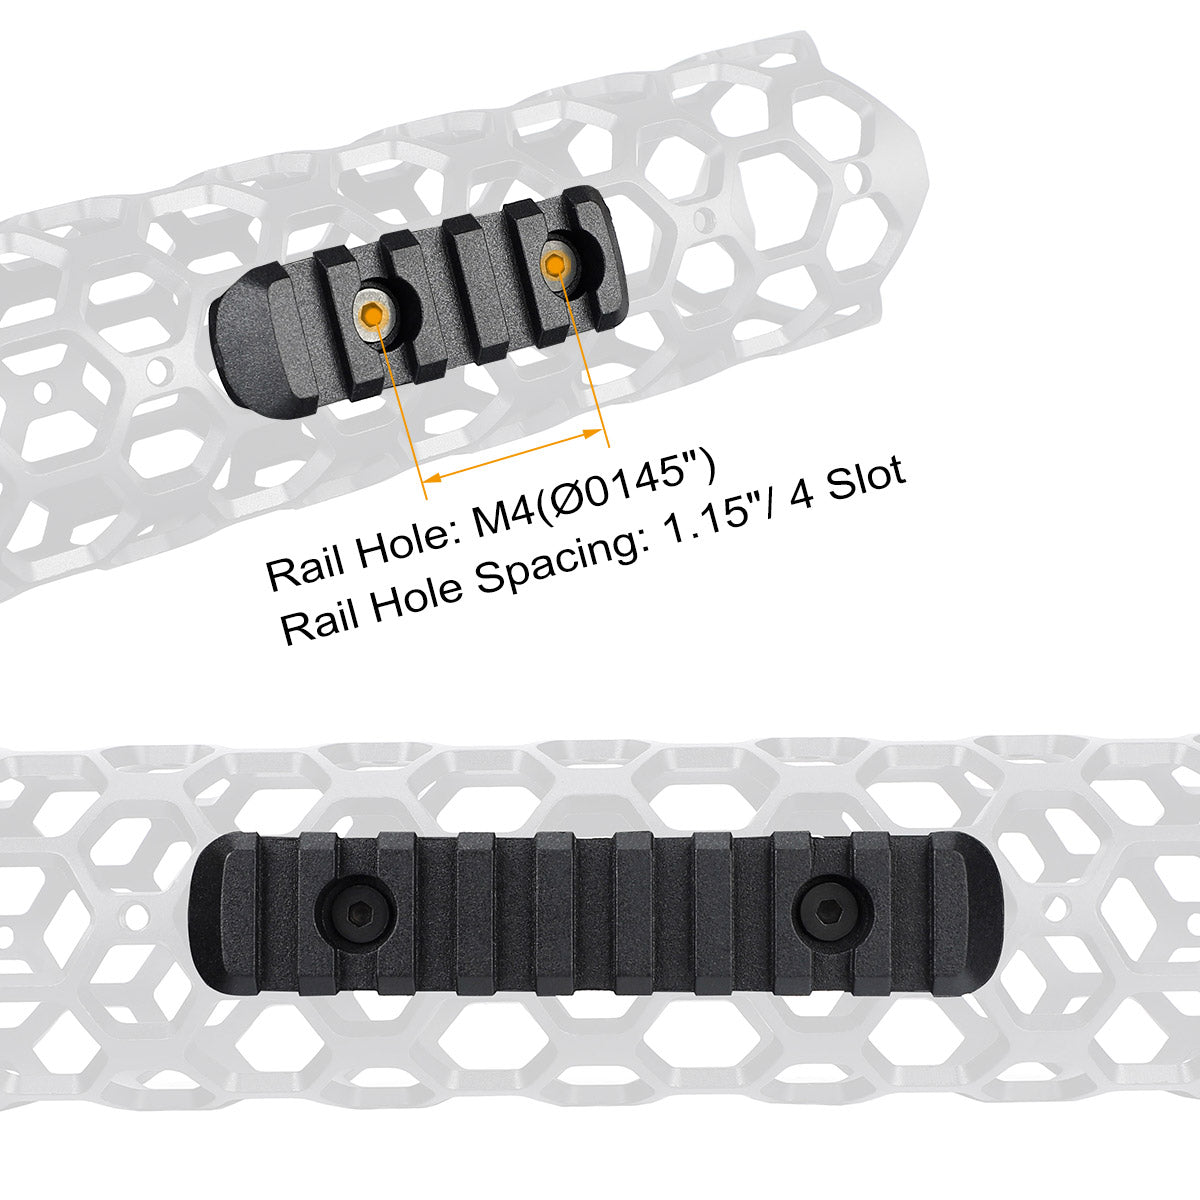 Which rail will fit this Lightweight handguard